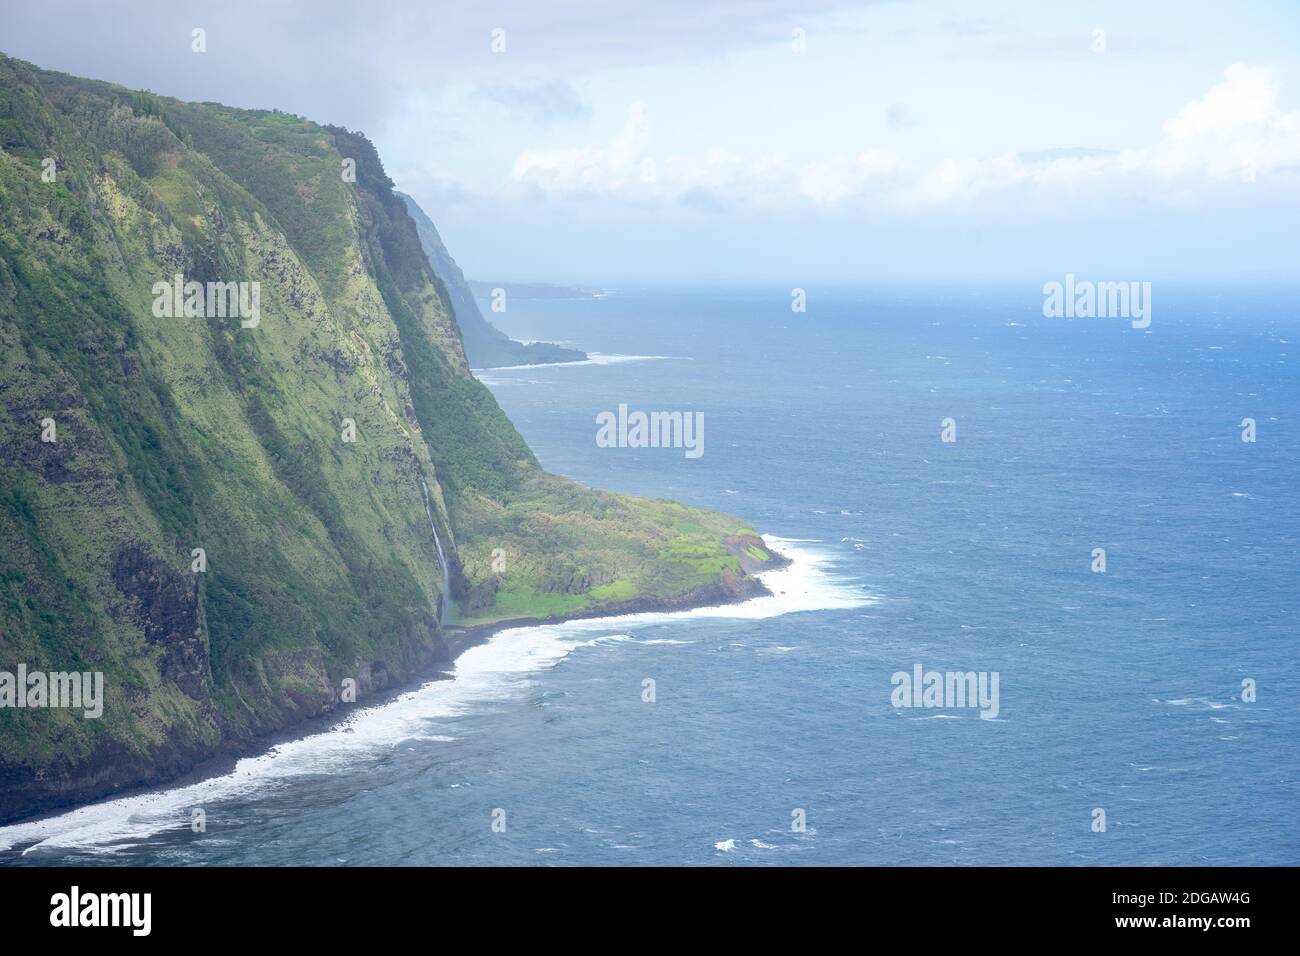 Cliffs north of Waipio valley, viewed from above on partially cloudy day - Hawaii island, Hawaii, USA Stock Photo